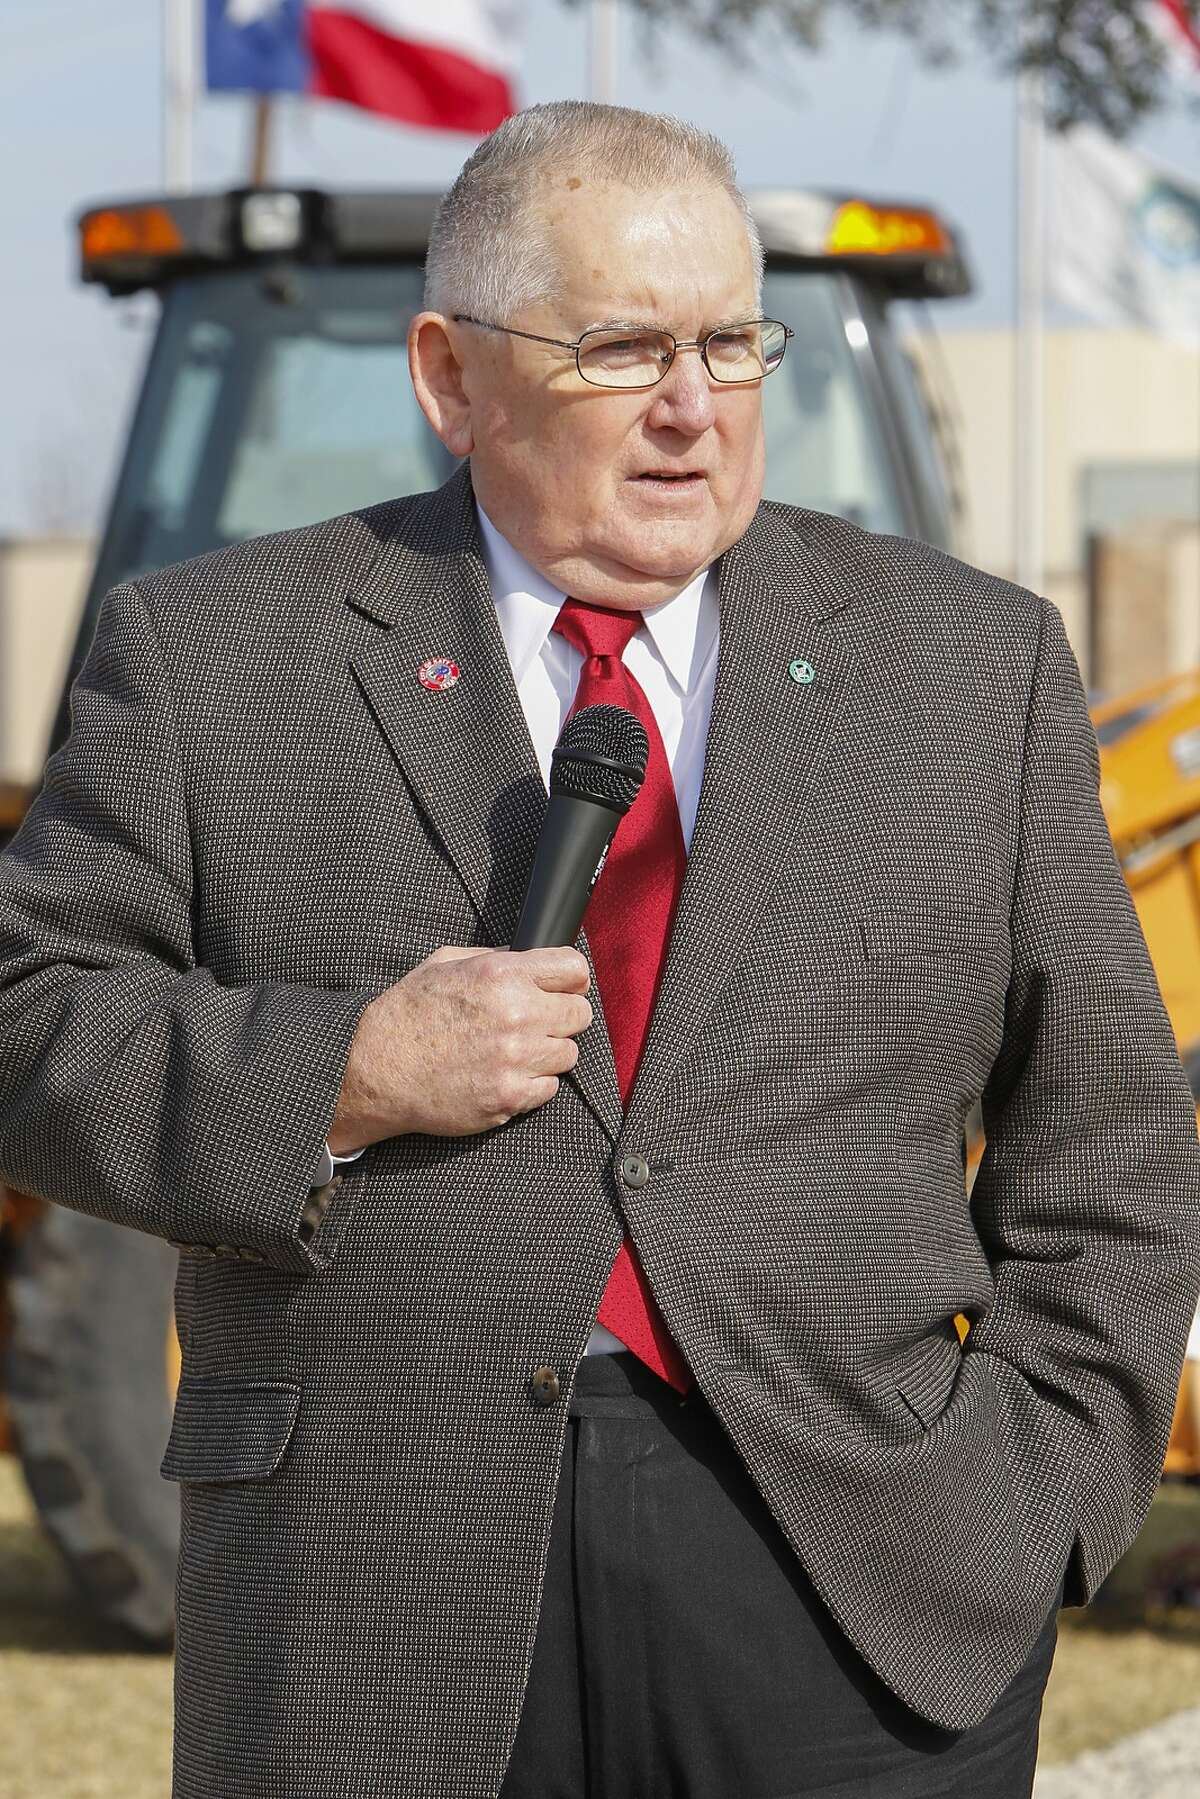 City of Katy Mayor Fabol Hughes addresses invited guests and dignitaries in front of the proposed construction site for the new Katy City Hall during the ceremonial groundbreaking in downtown Katy on January 15, 2015.